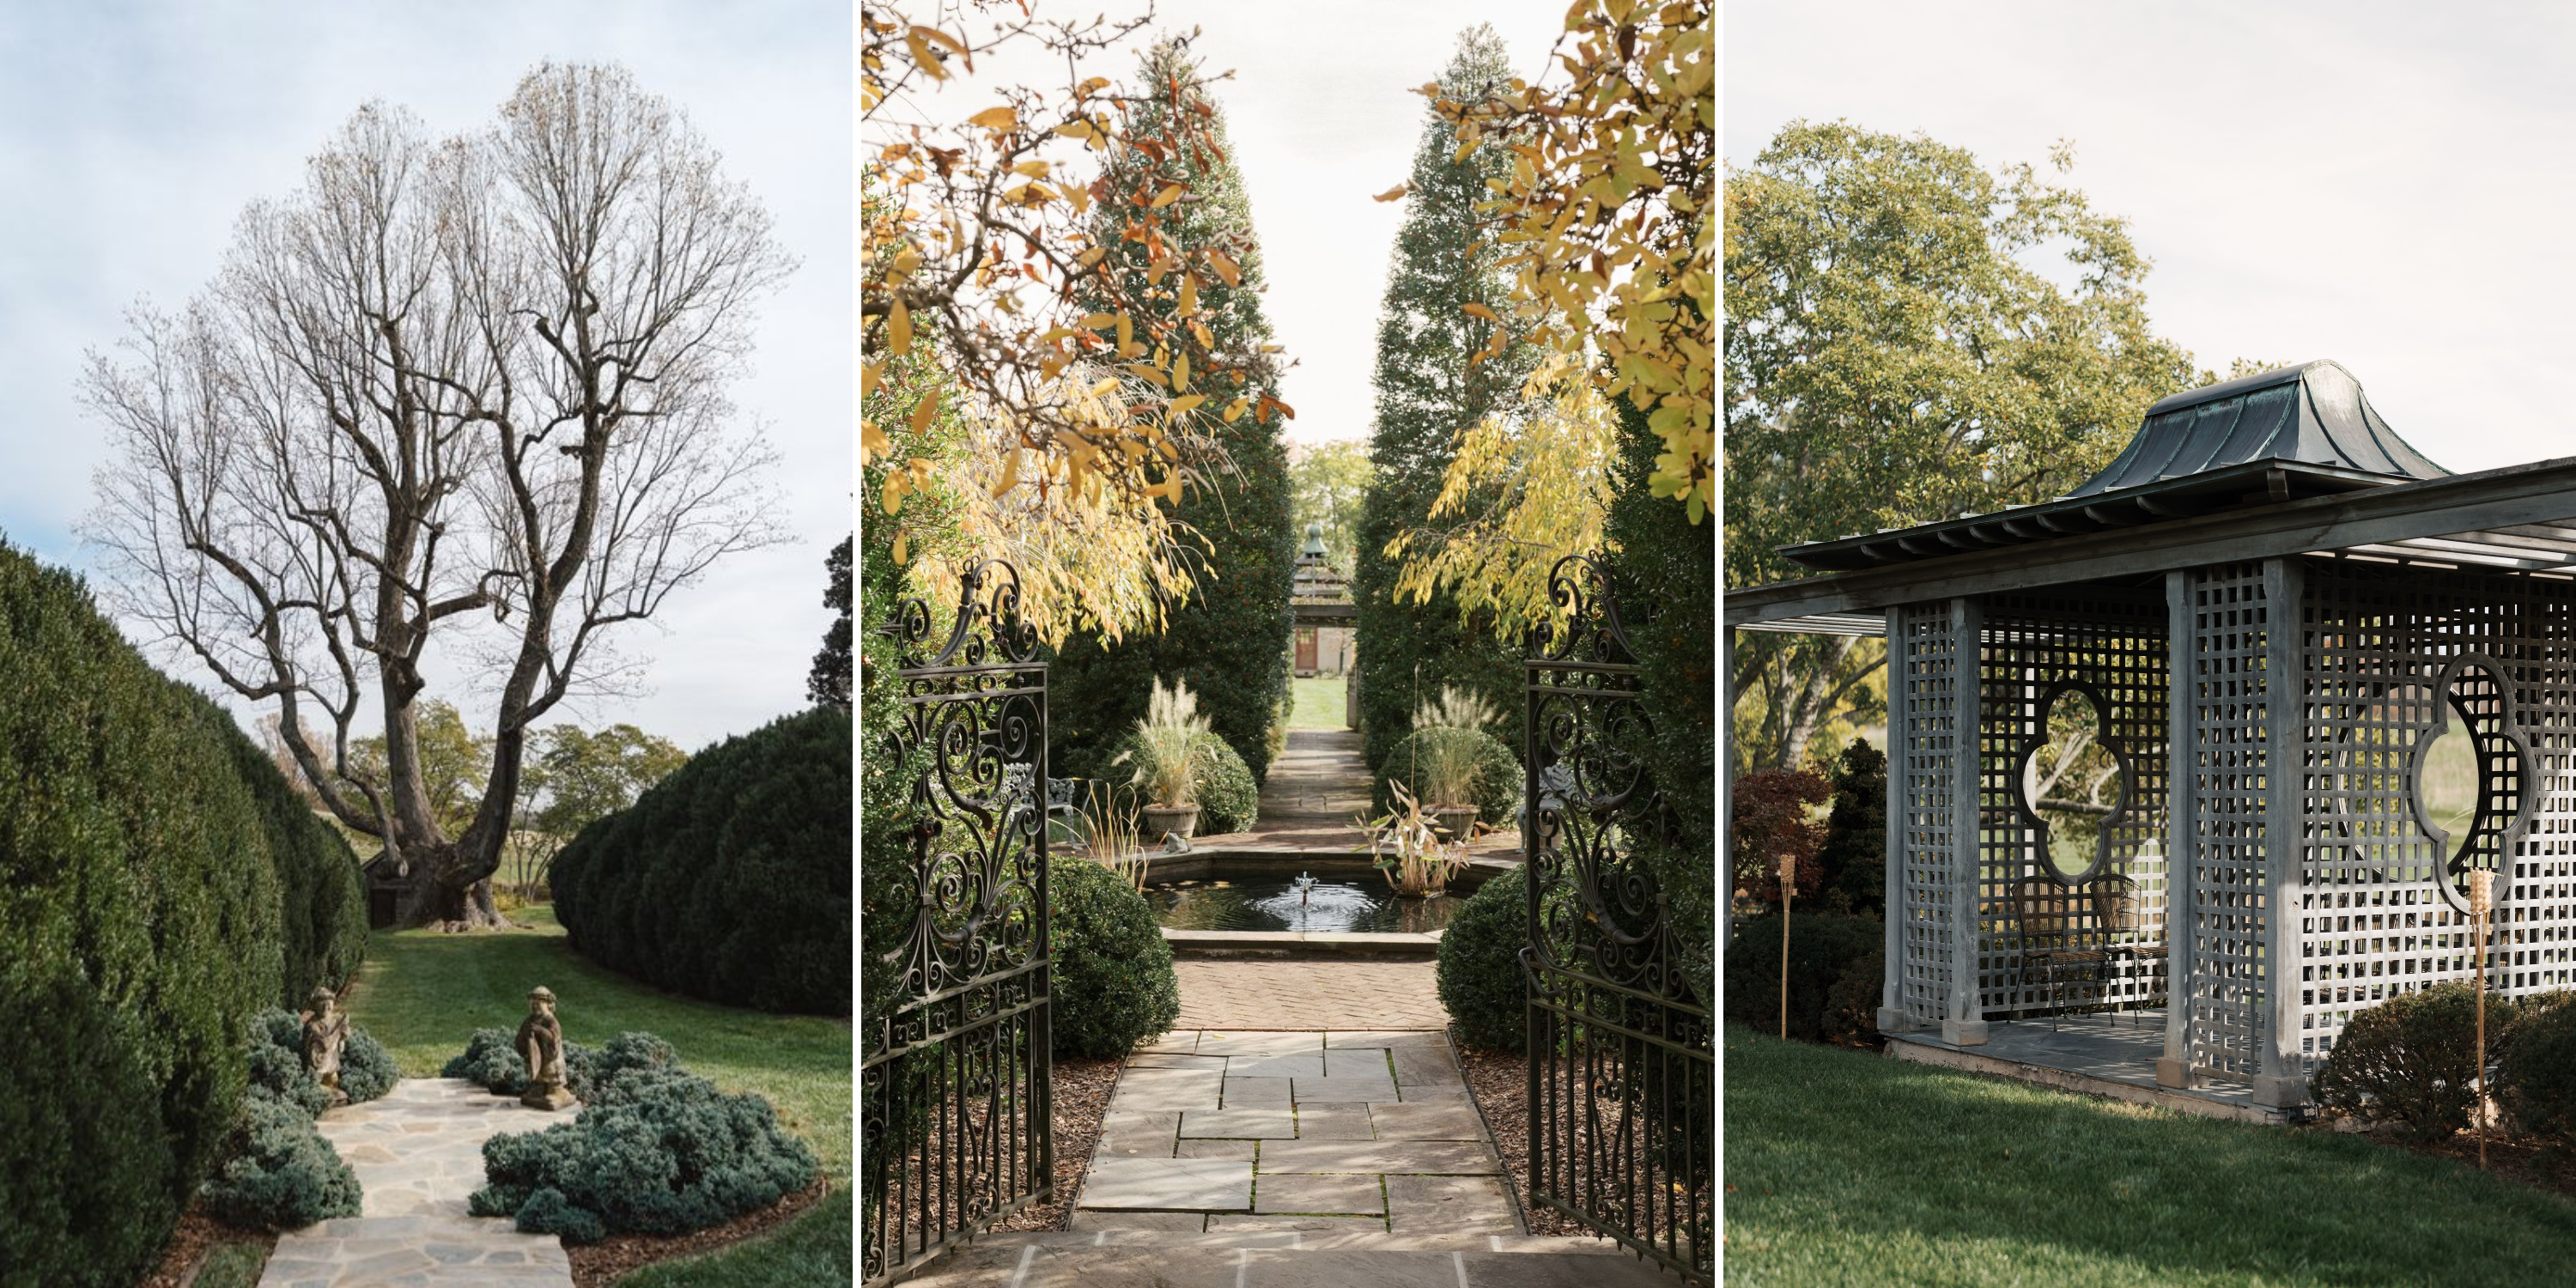 A collage of three images: Asian sculptures in the garden; iron gates lead to a fountain; a wood structure.